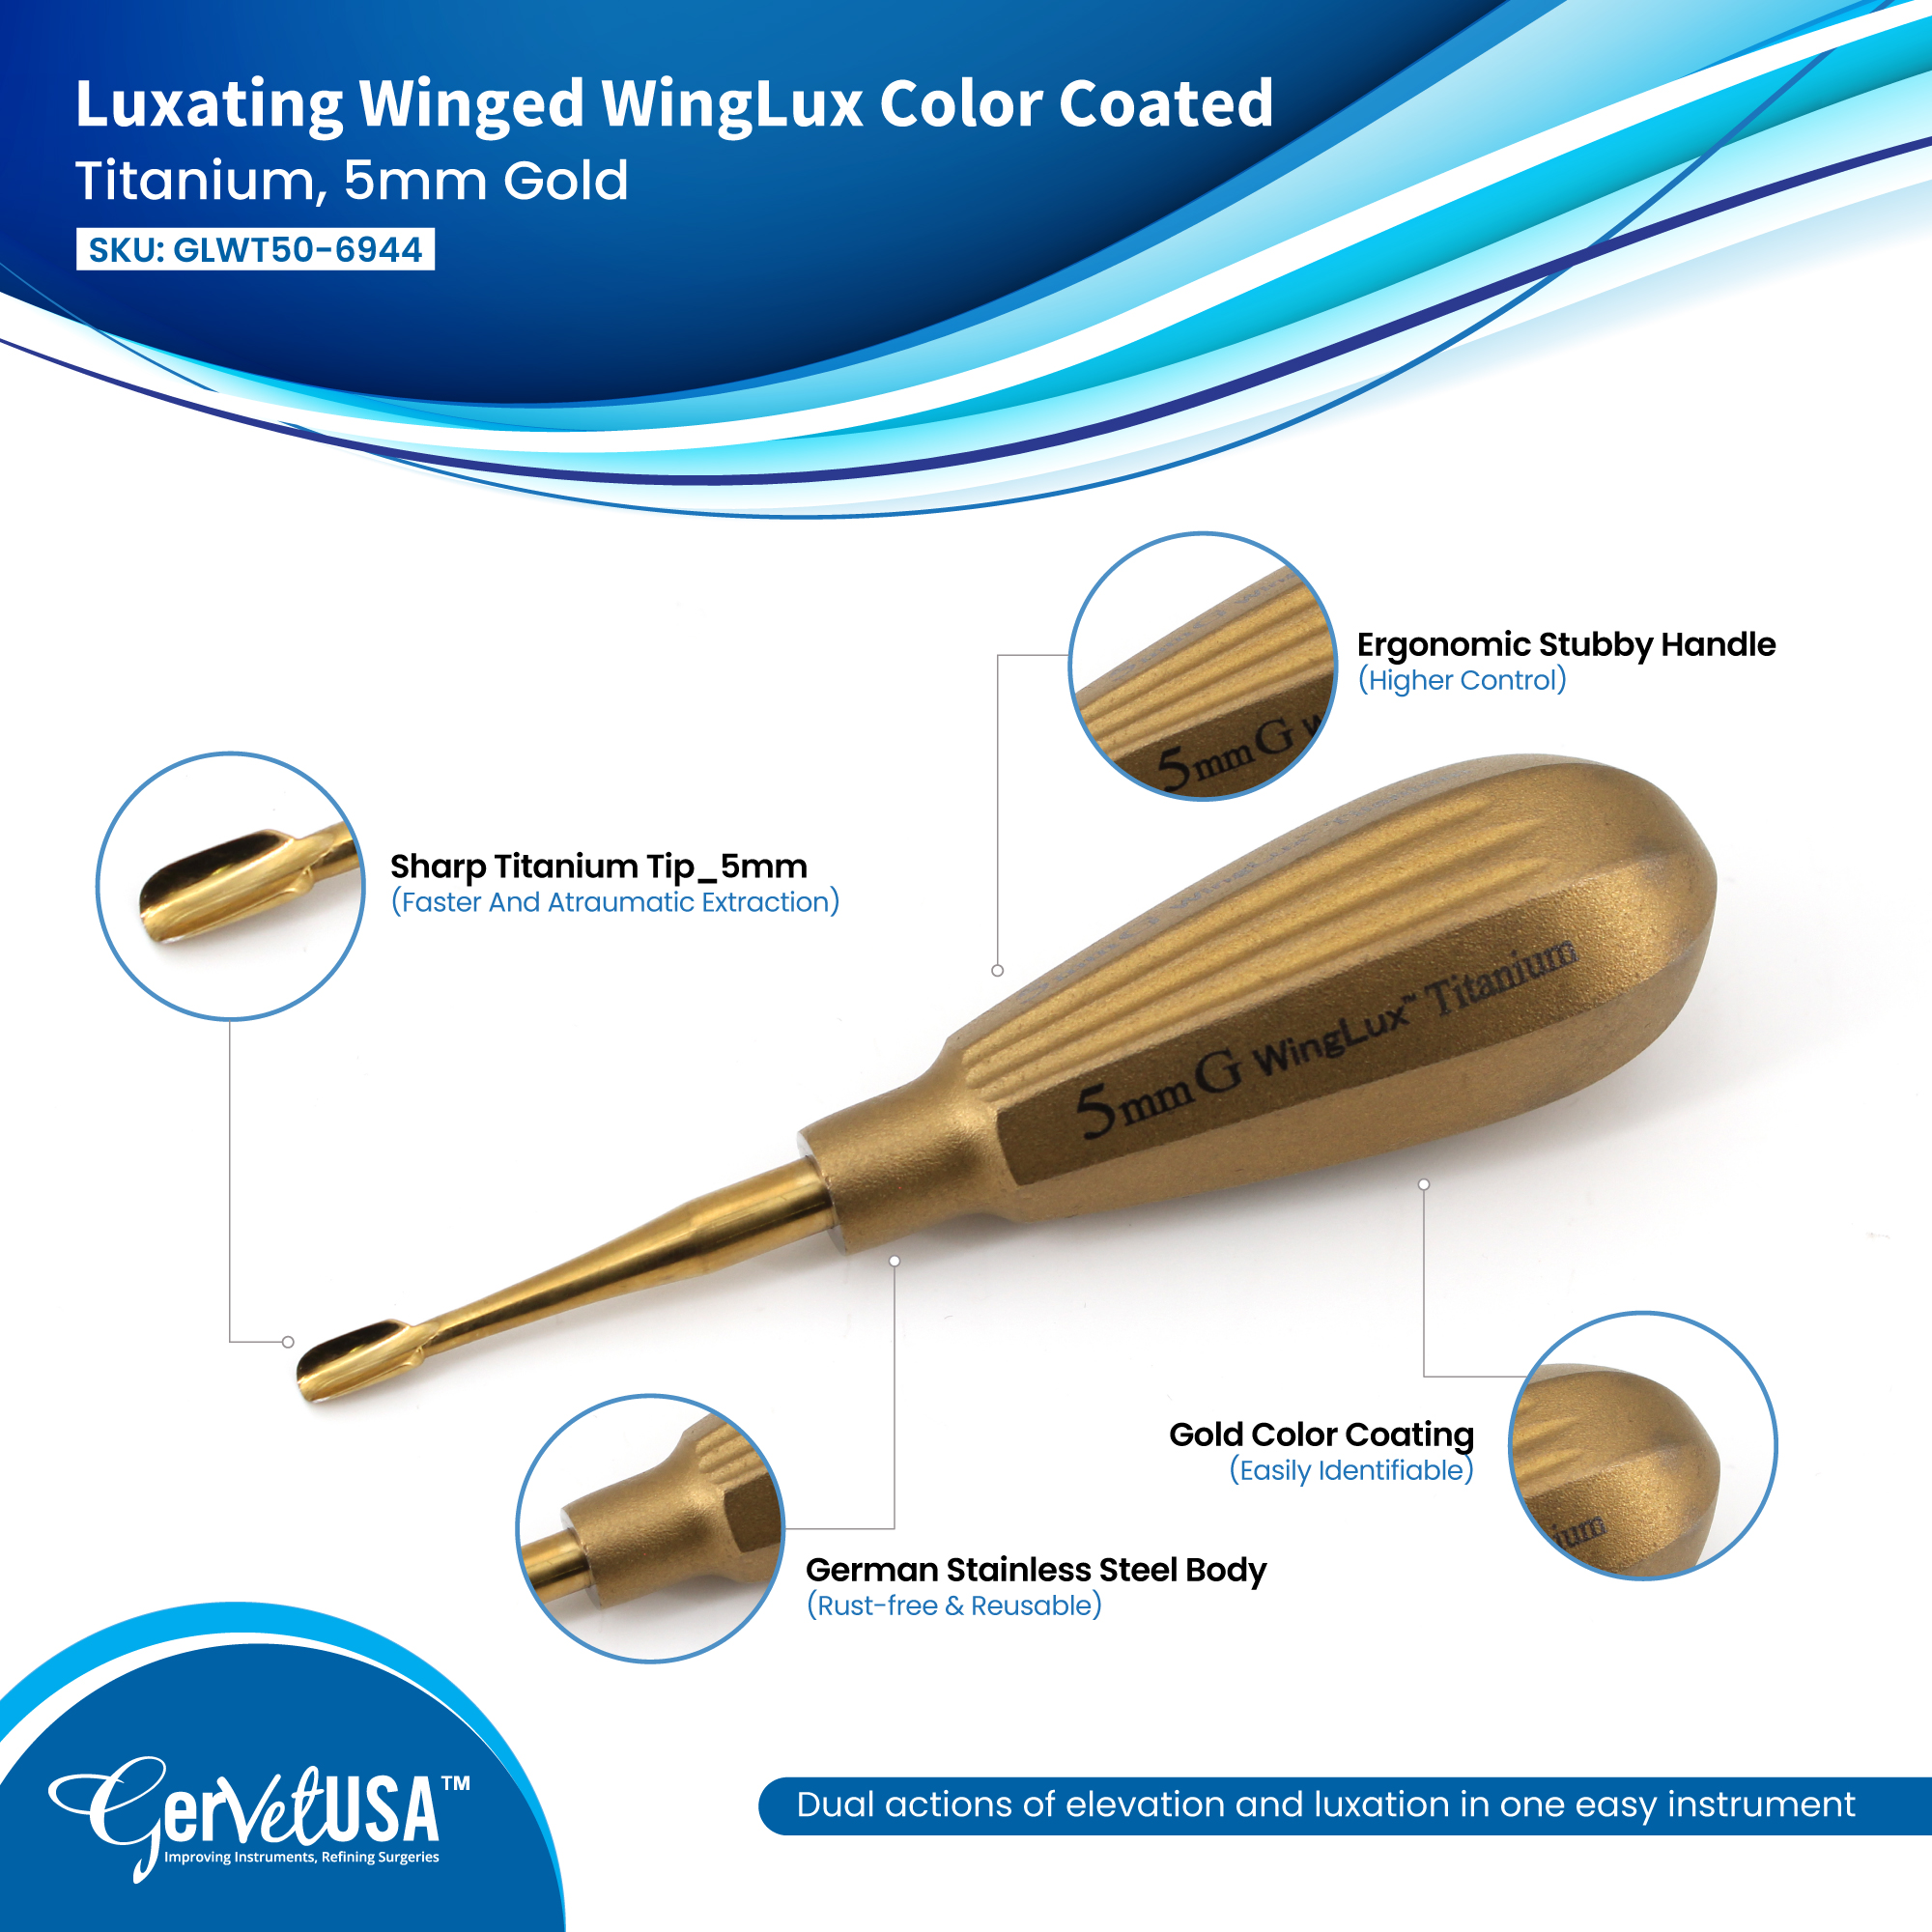 Luxating Winged WingLux Color Coated Titanium, 5mm Gold